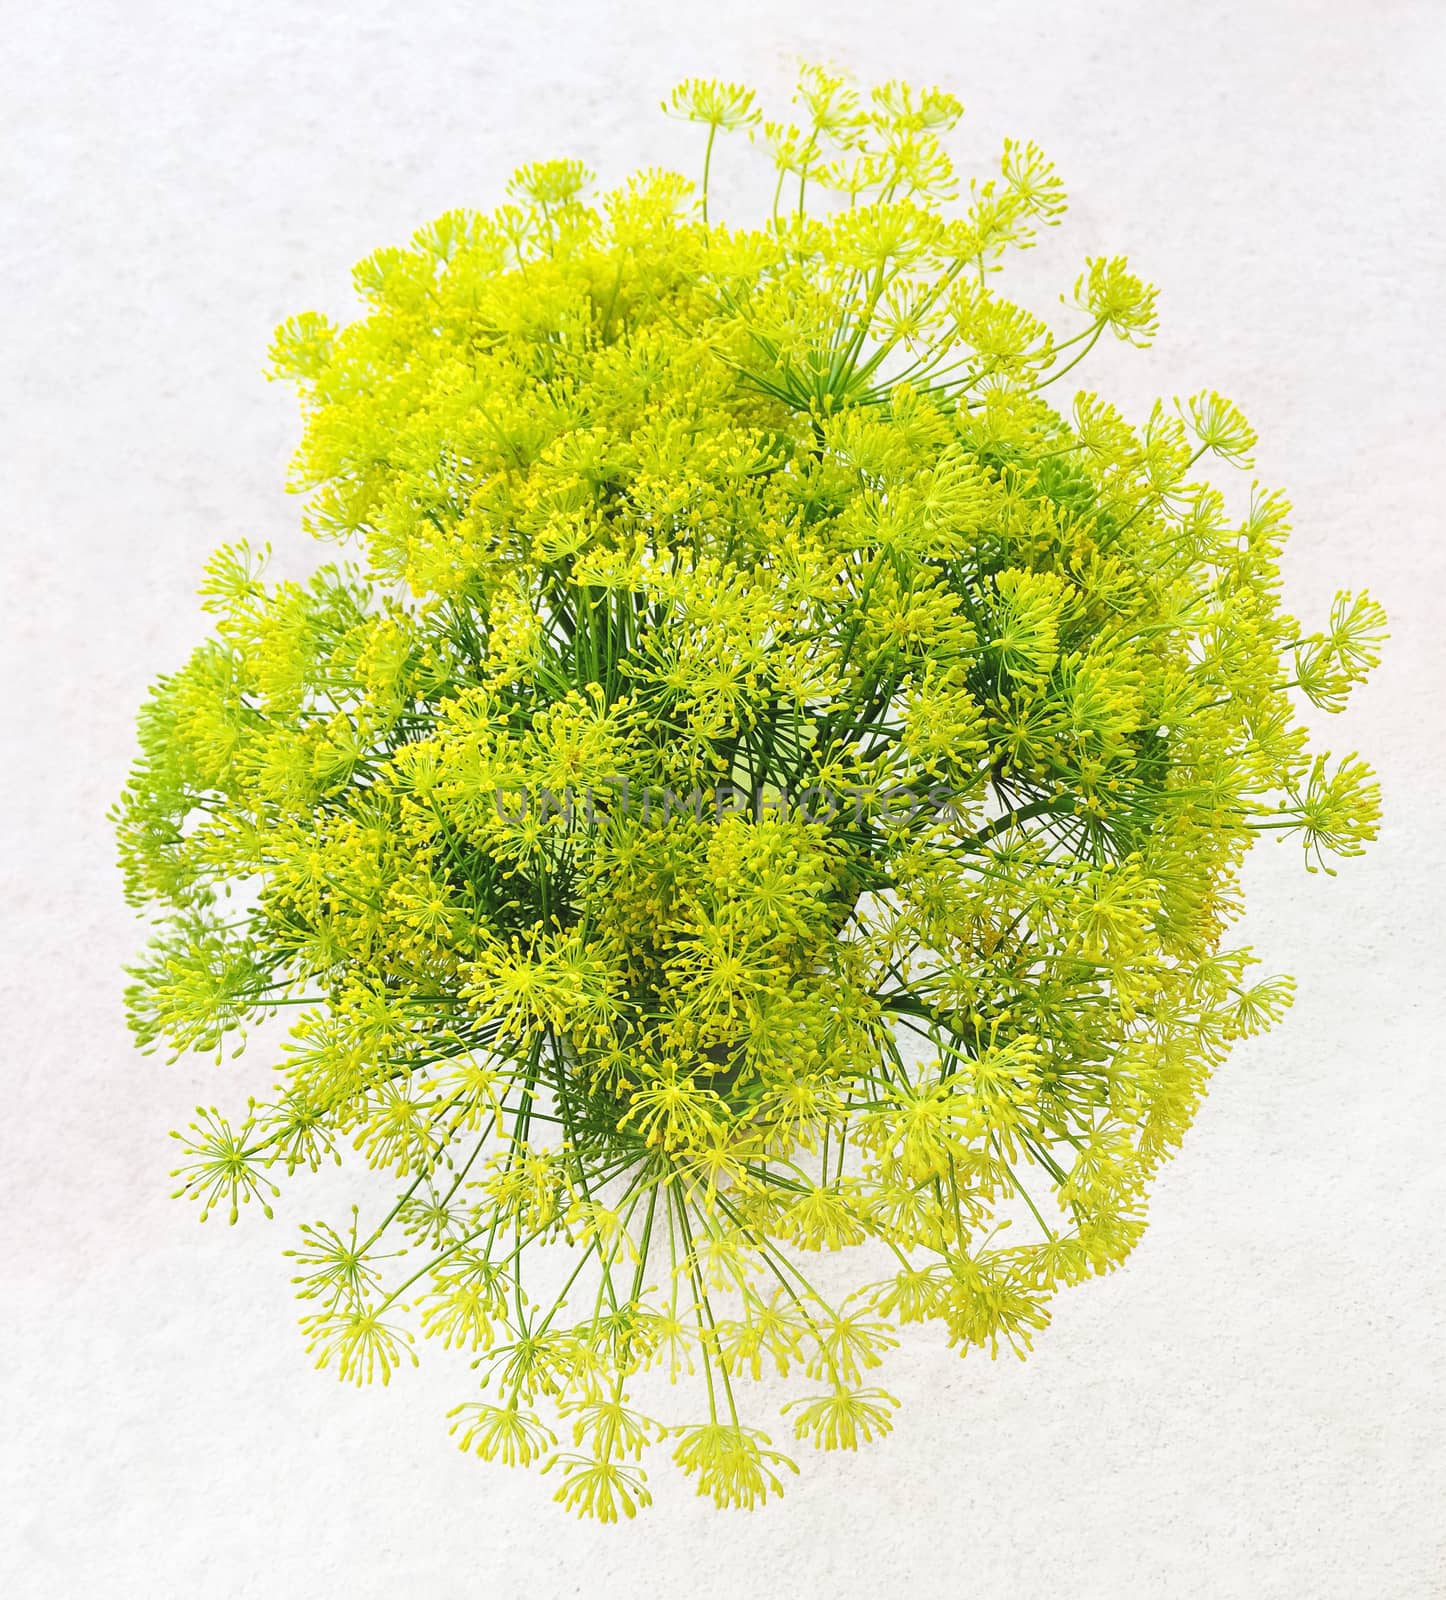 Bouquet of fresh dill flowers on white background. Garden herbs.